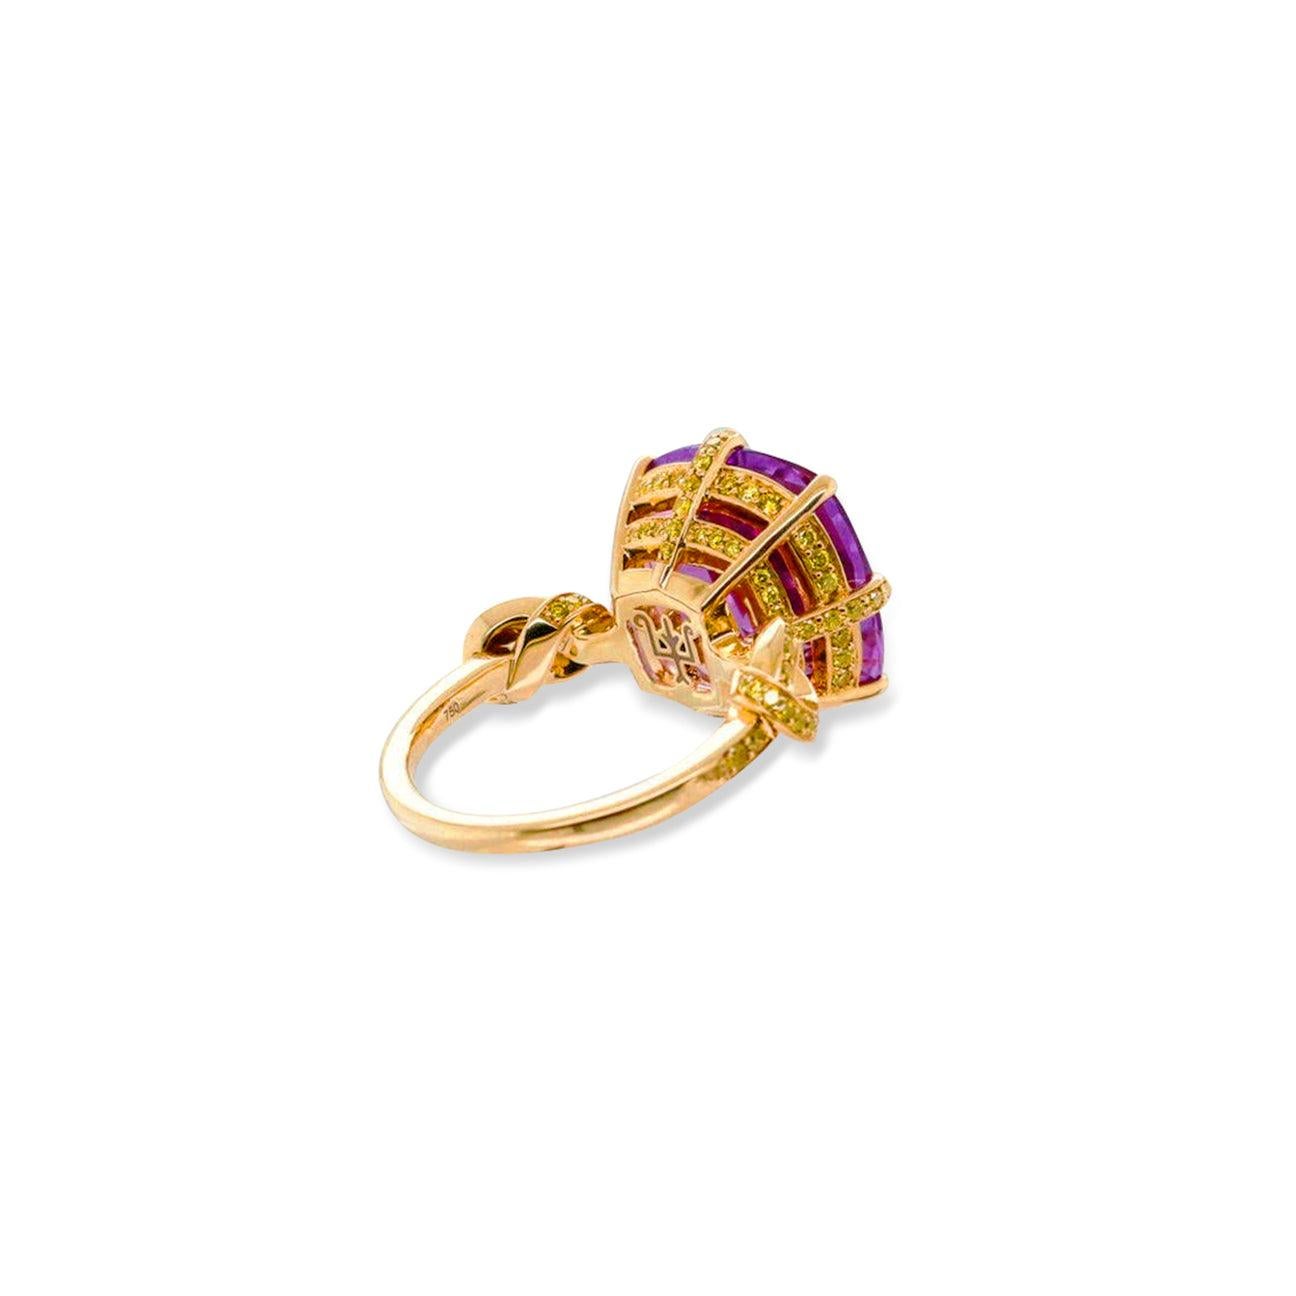 For Sale:  'Forget me Knot' Amethyst and Yellow Diamond Cocktail Ring in 18ct Yellow Gold 8